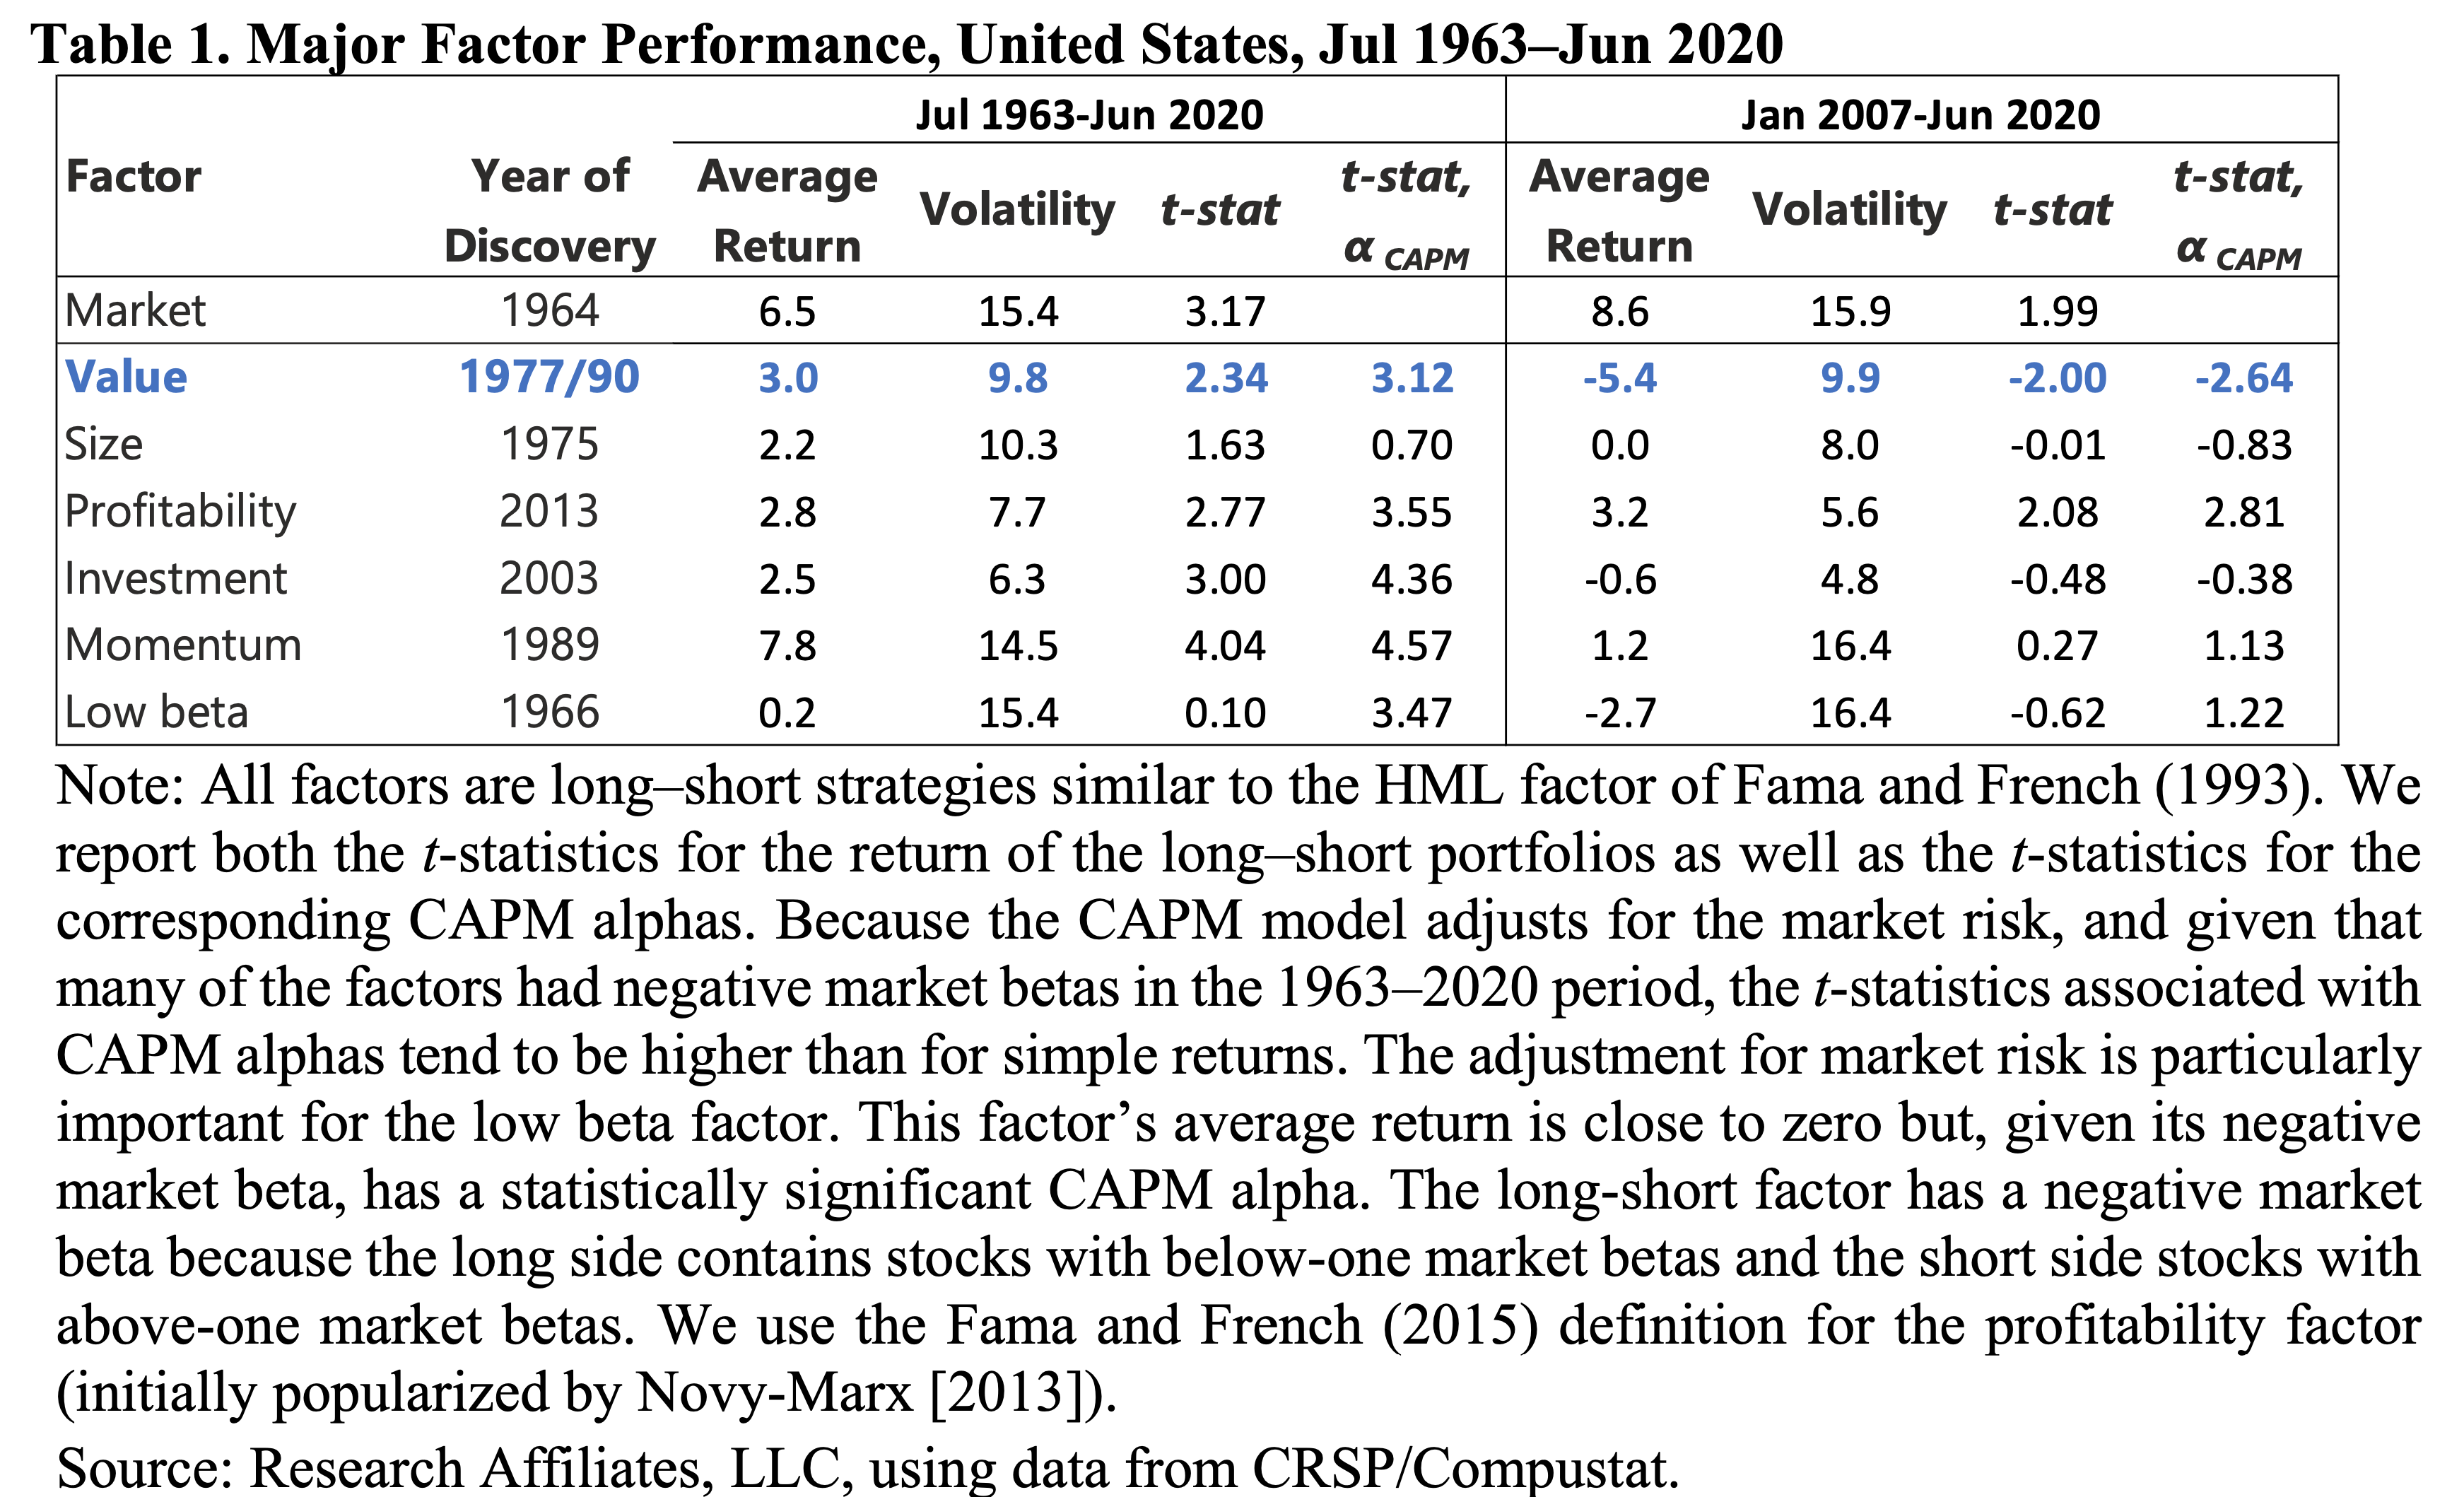 Factor performance over time. Value has had a tough time this past decade, though that might depend on how you define value. Source: [Arnott et al. (2020)](https://papers.ssrn.com/sol3/papers.cfm?abstract_id=3488748).